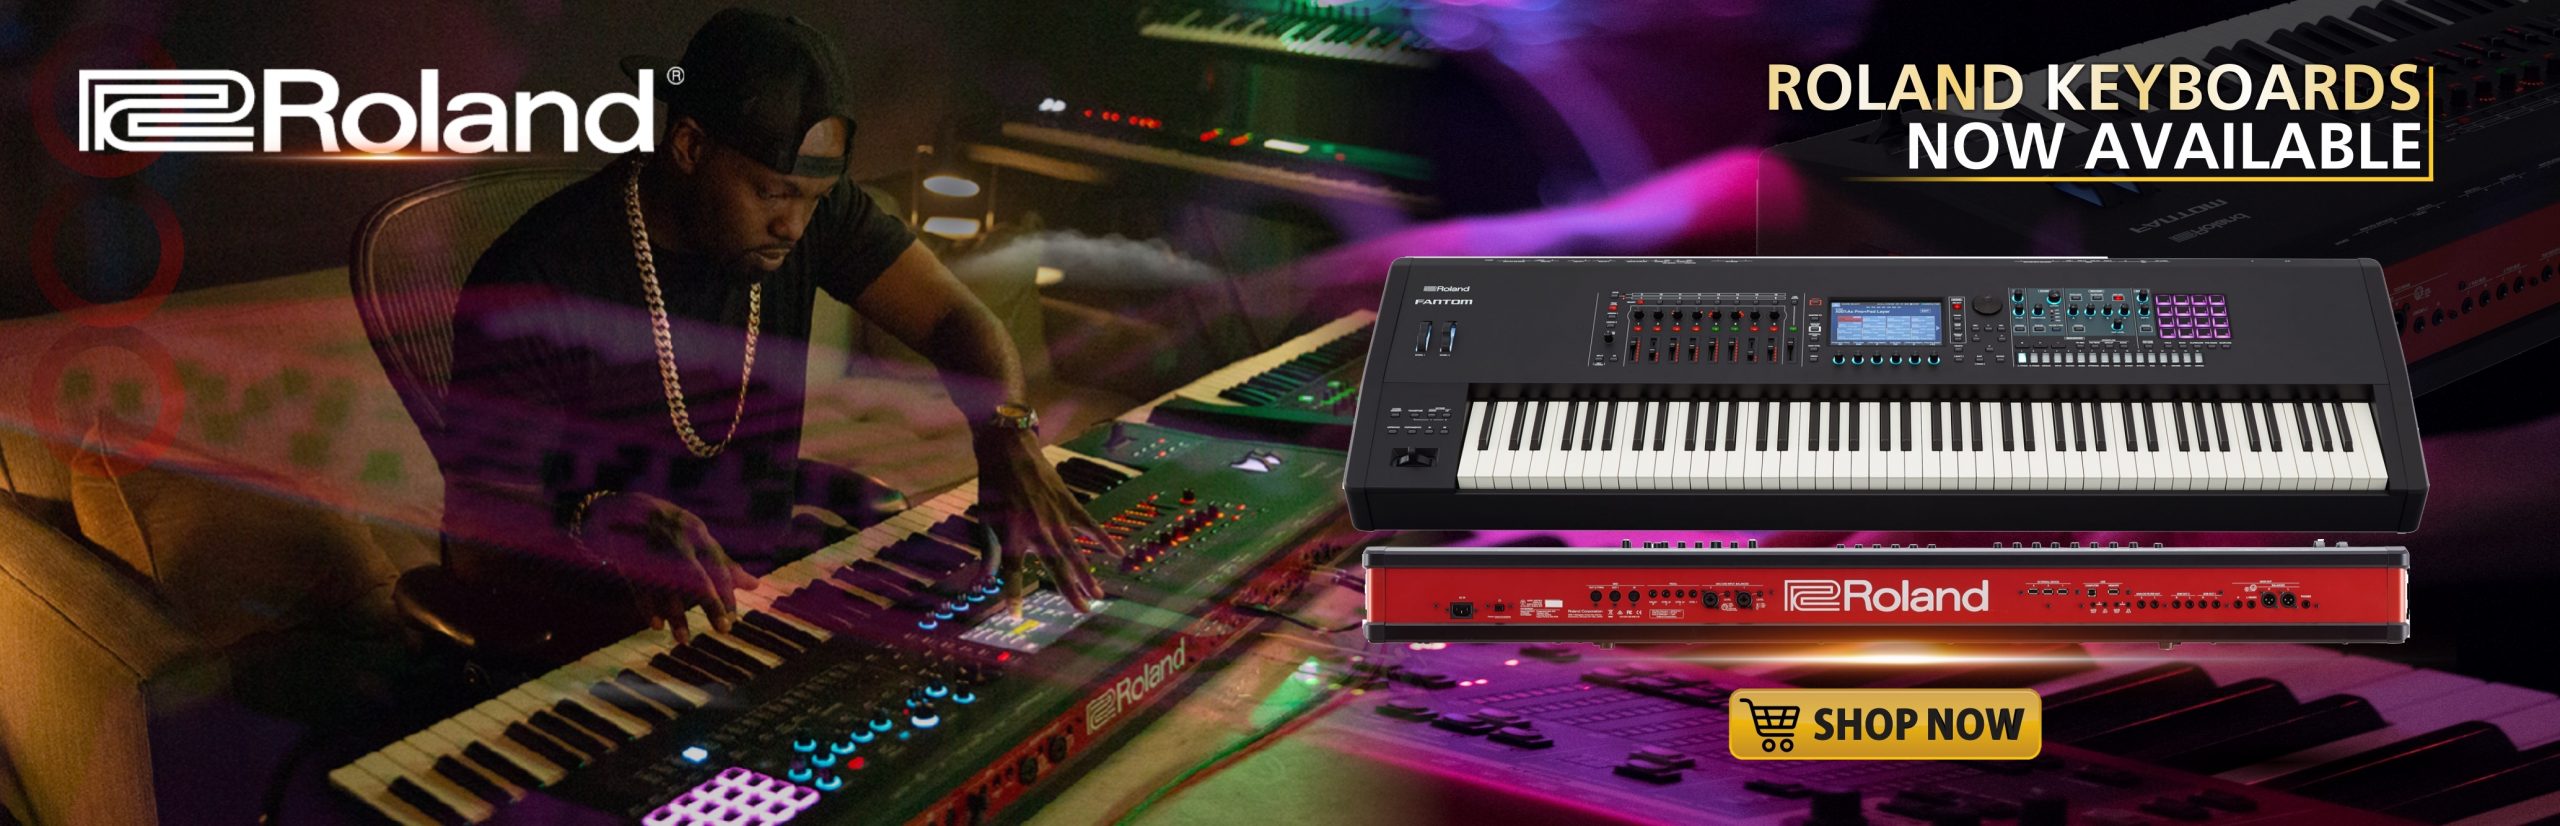 With The New Fantom 8 Synthesizer Keyboard, You Have Everything and Always.